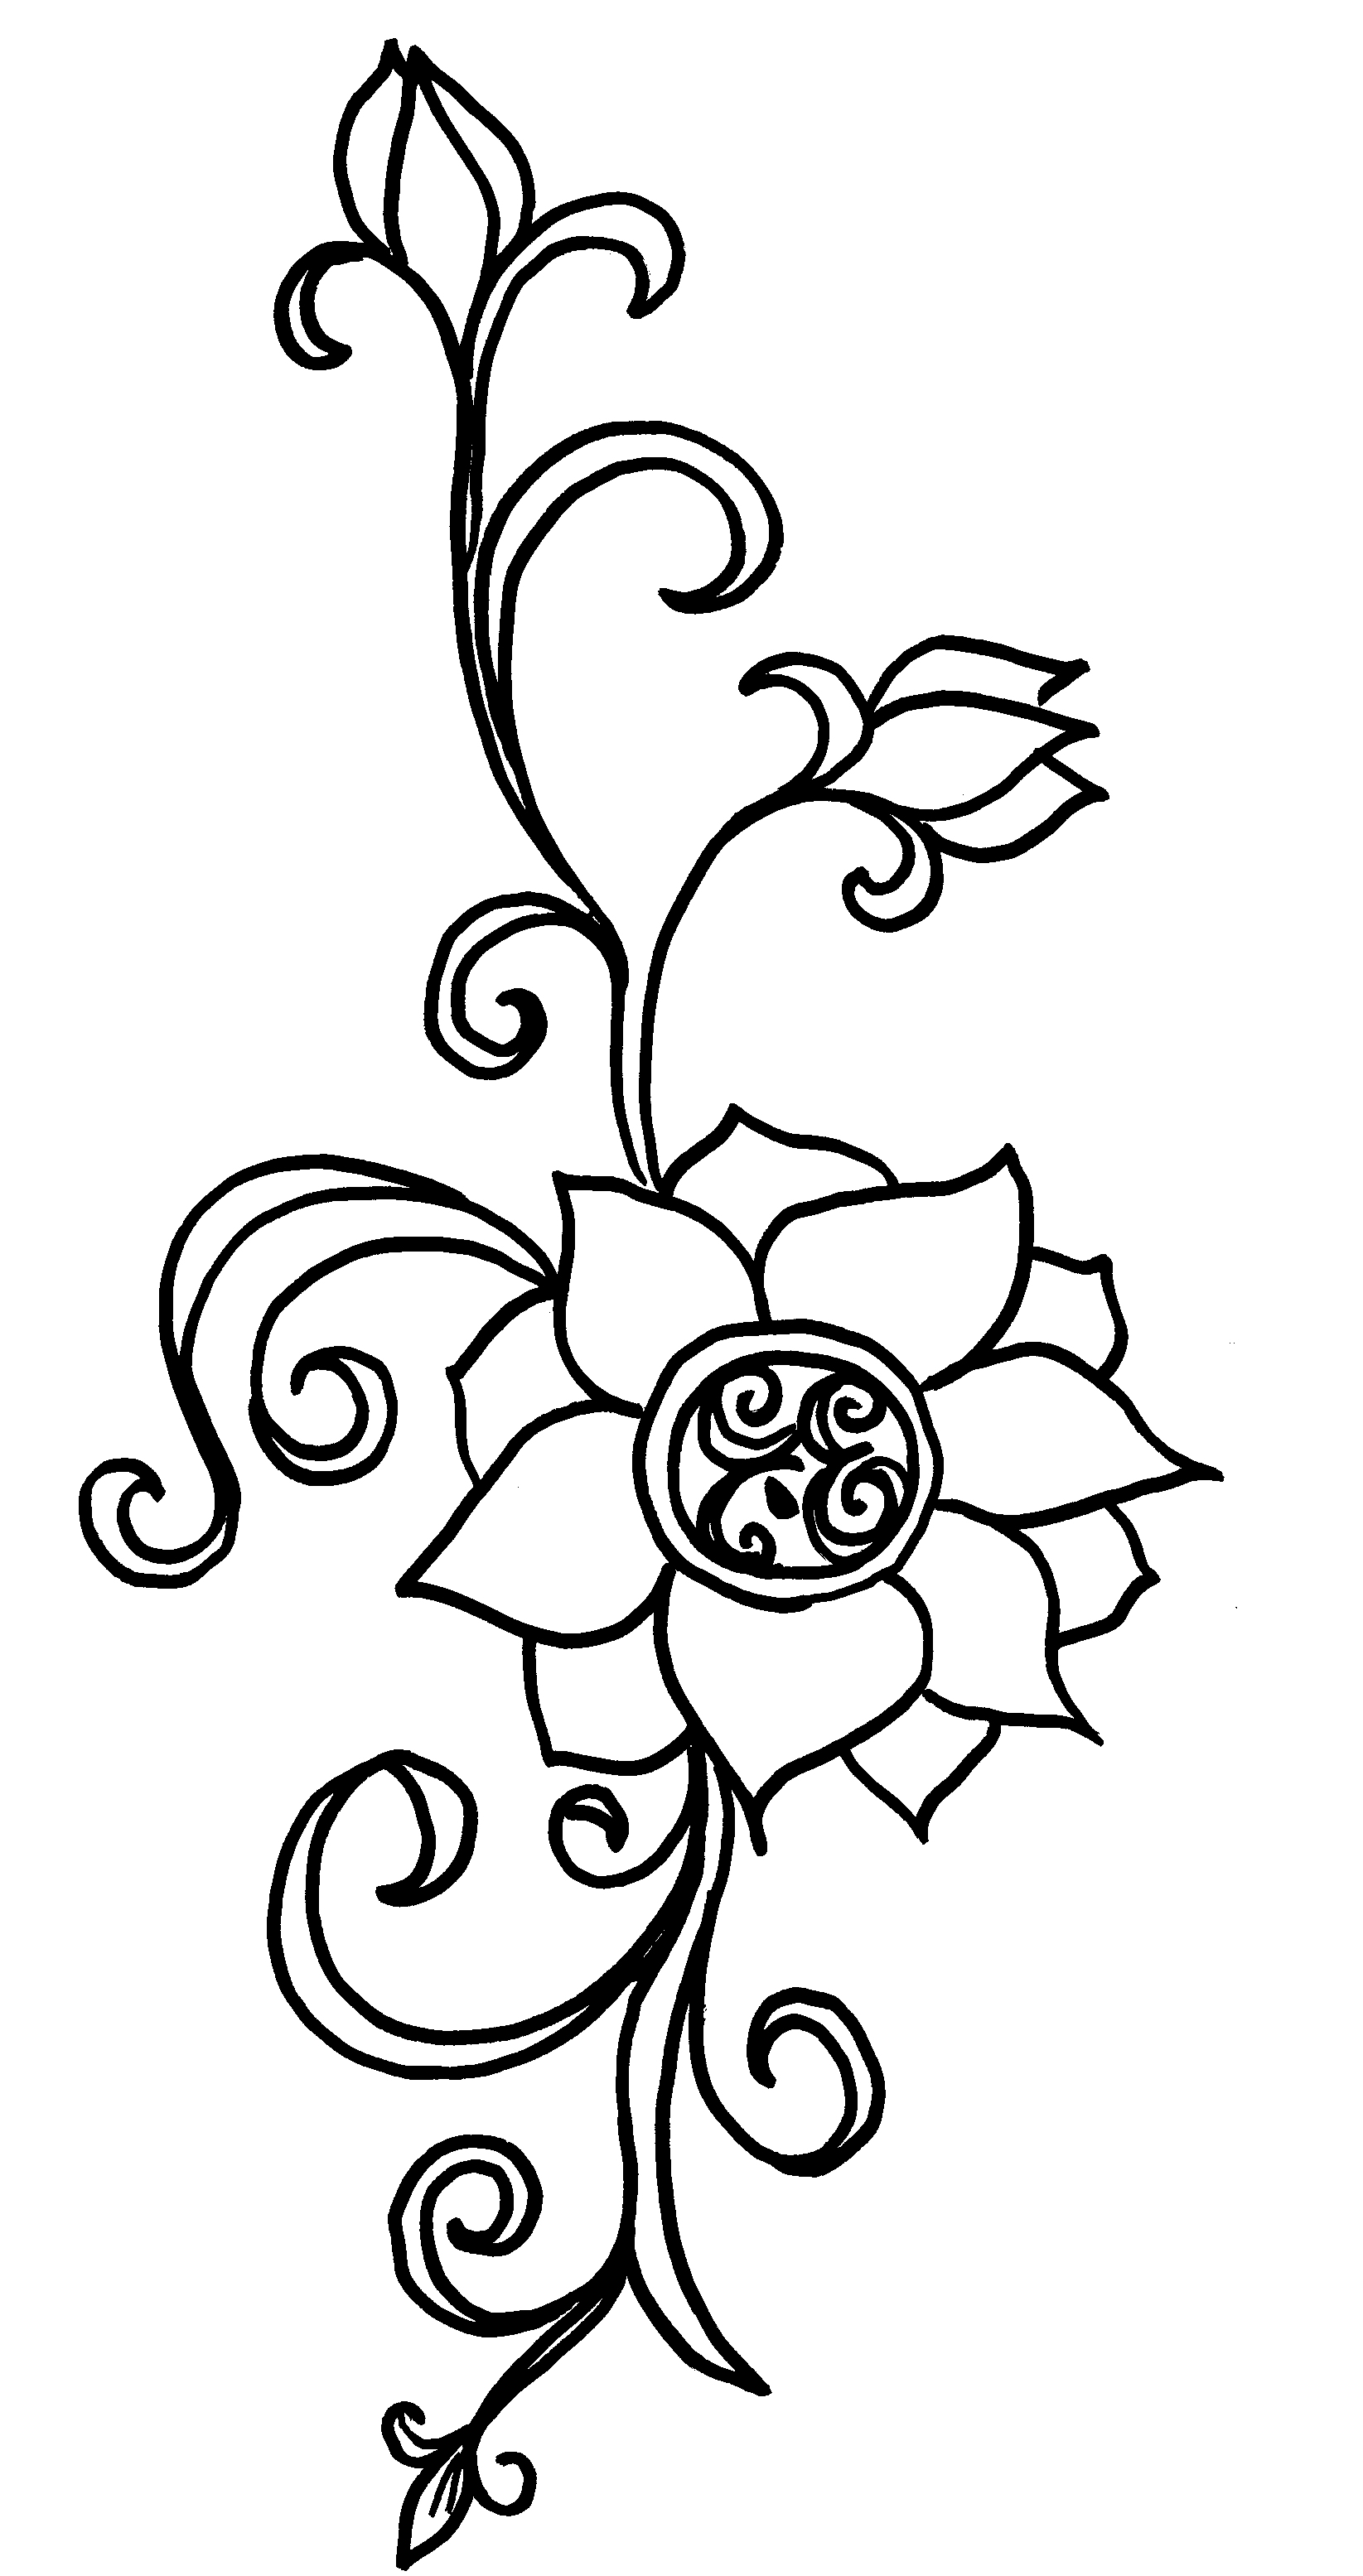 Flower Vines Drawing at GetDrawings.com | Free for personal use Flower